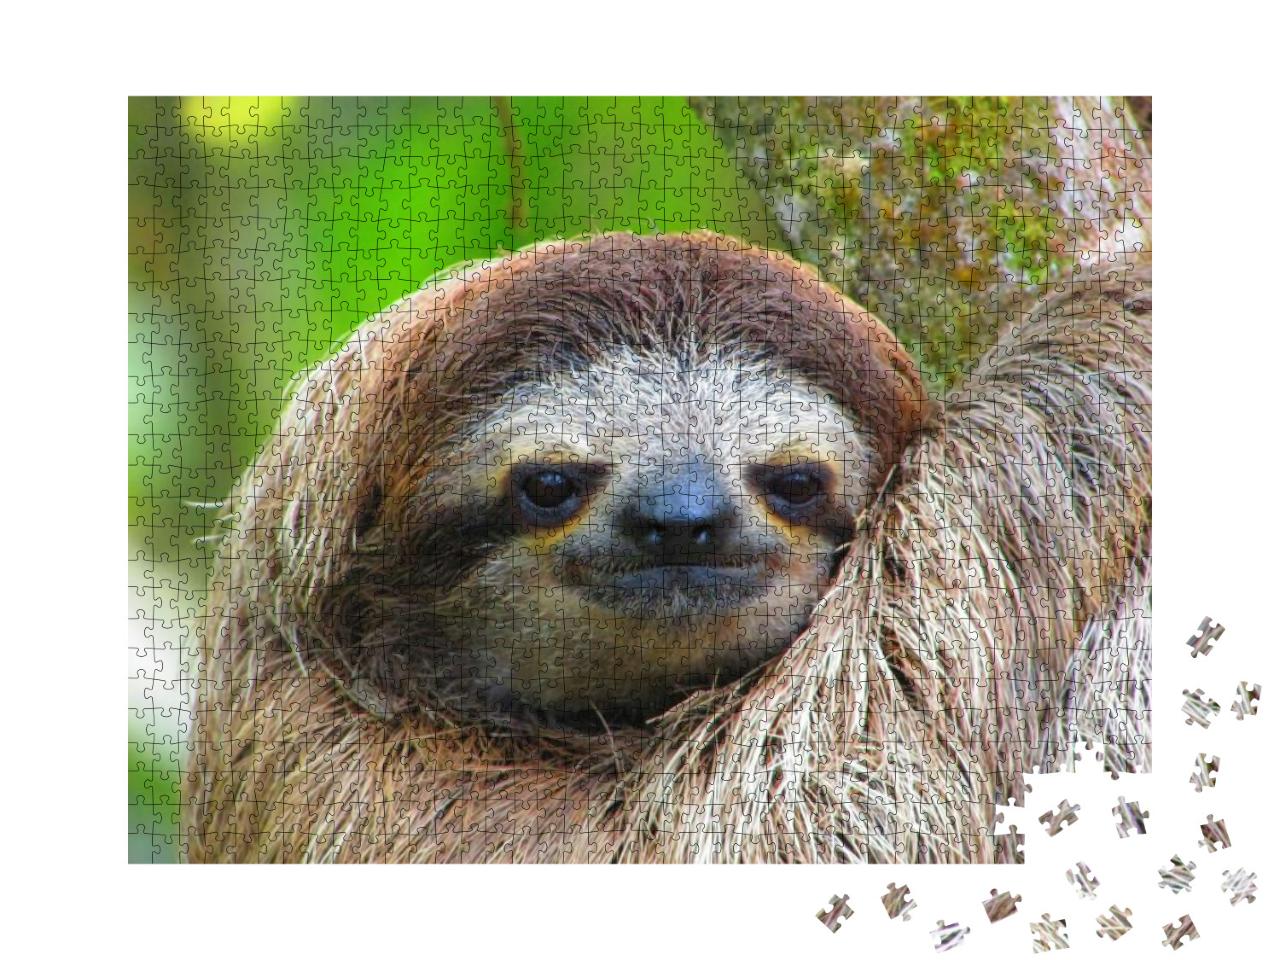 Awake Sloth from Costa Rica... Jigsaw Puzzle with 1000 pieces